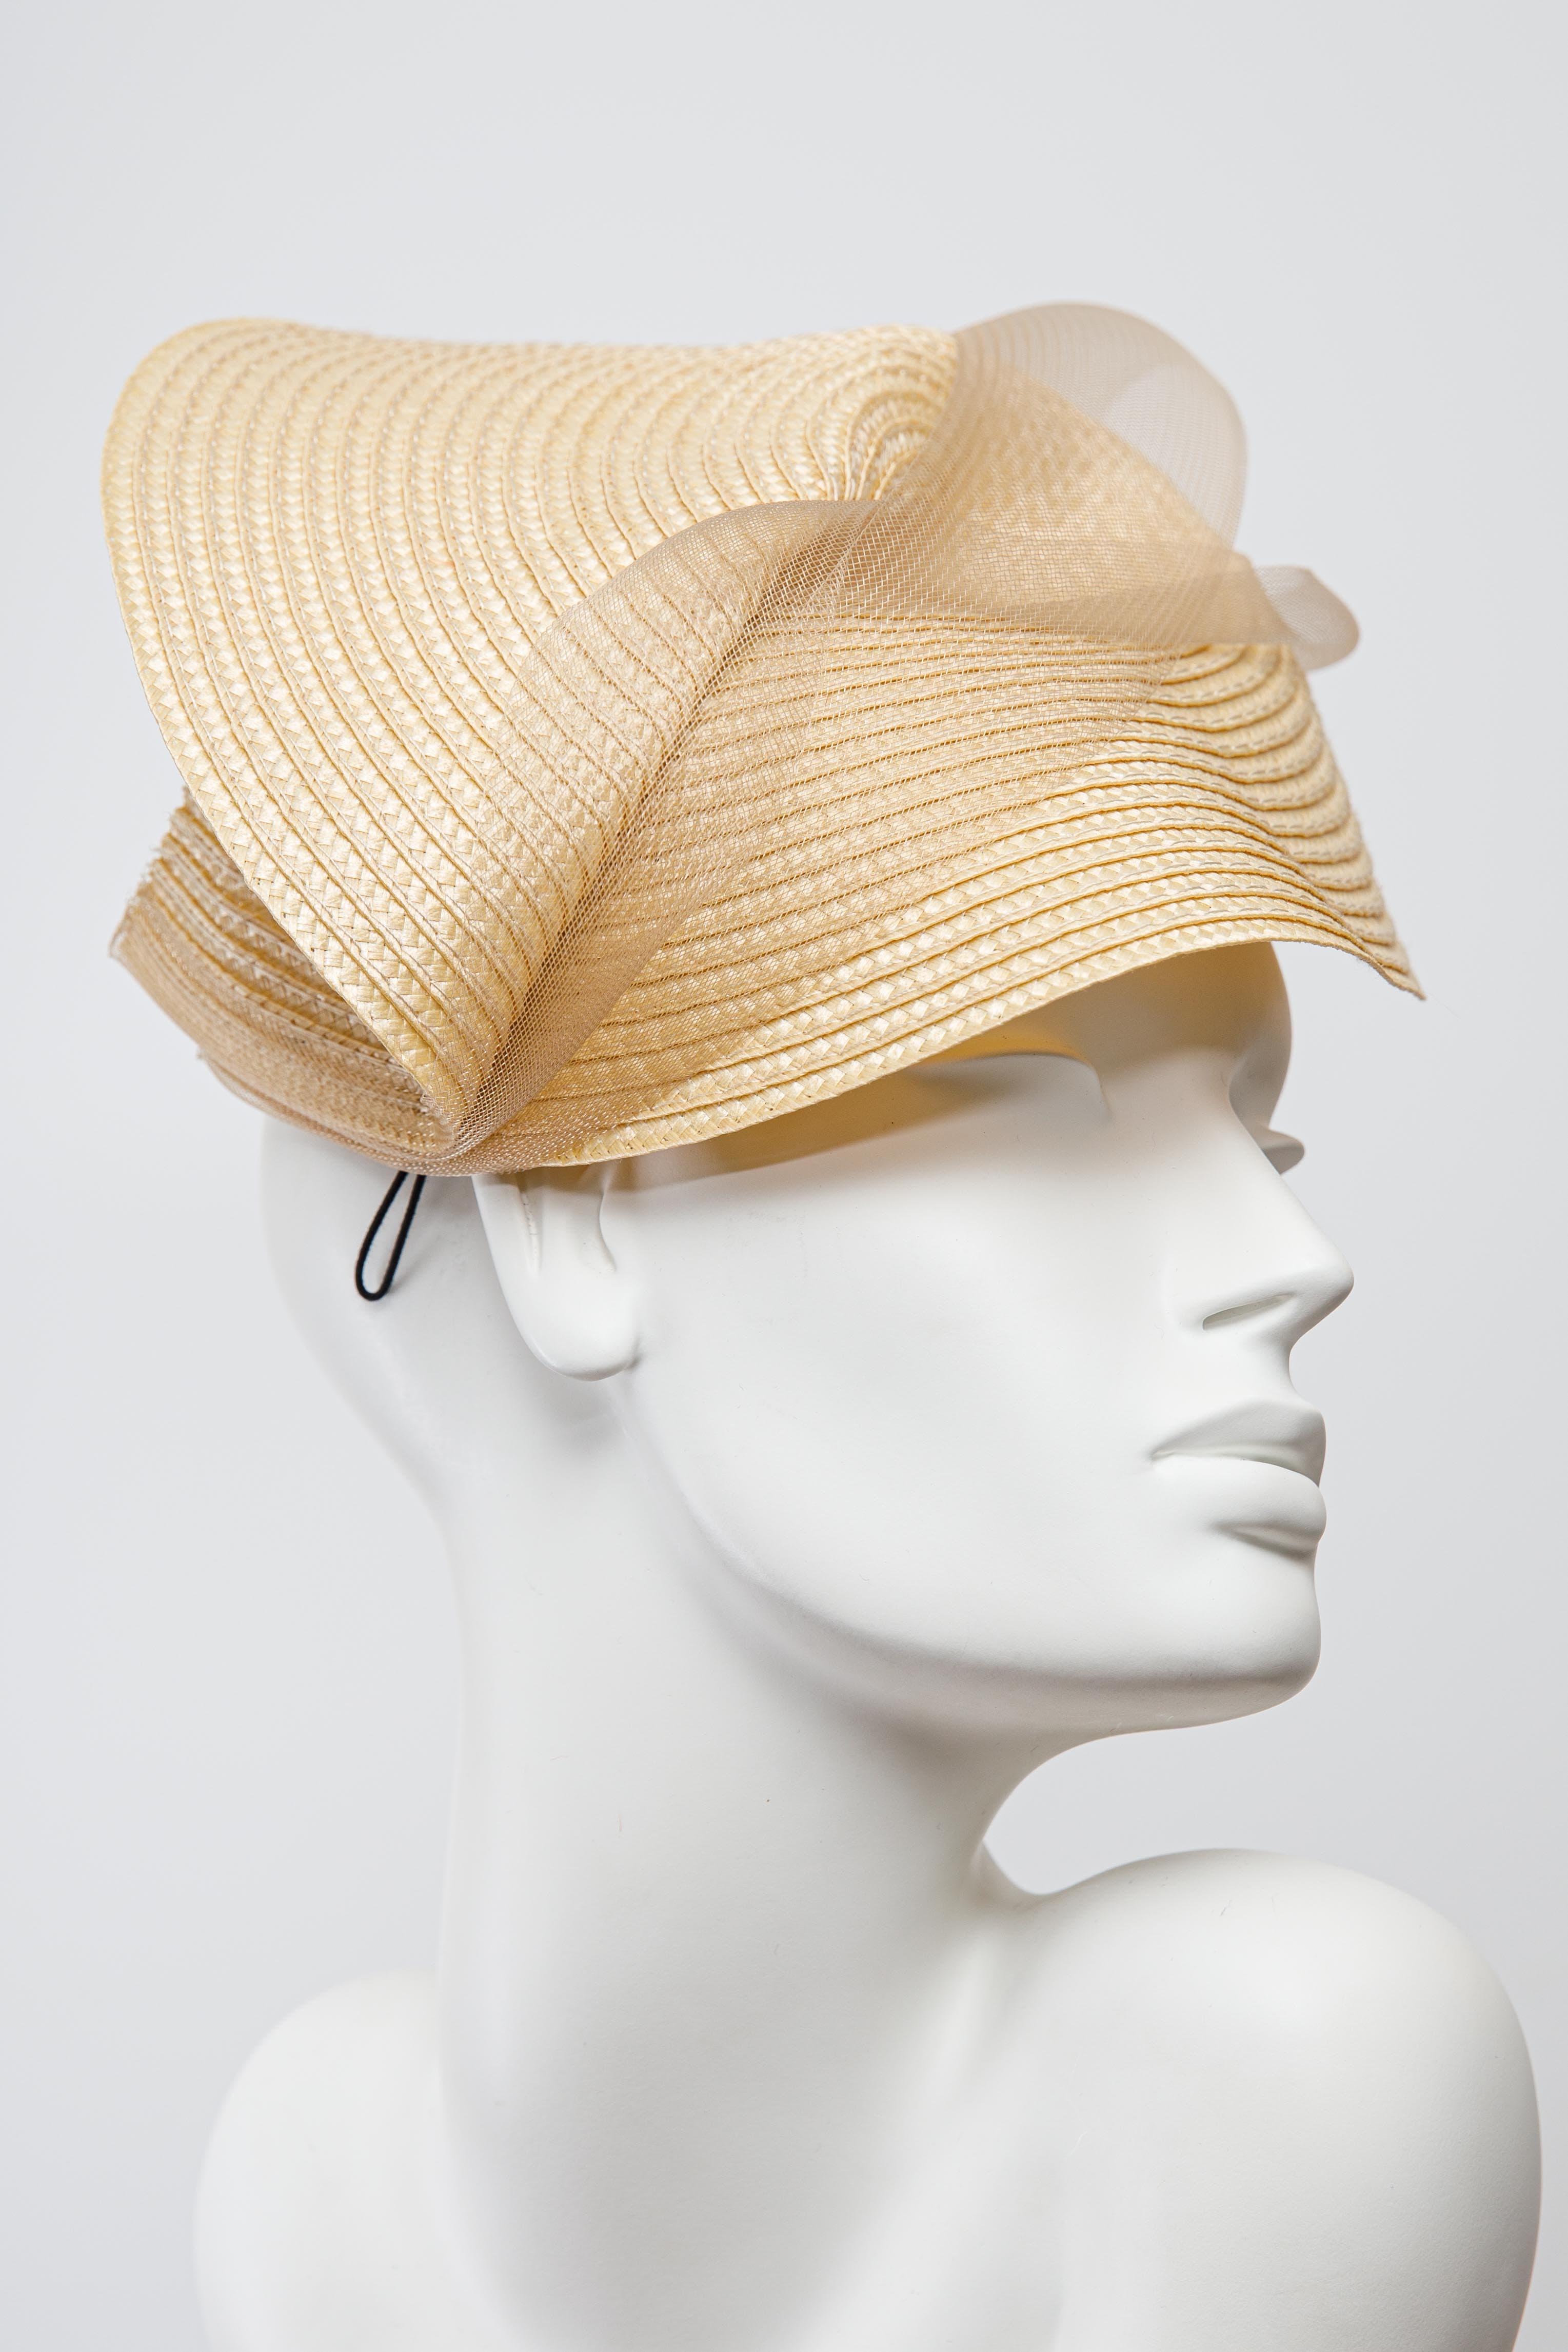 Linea Saucer Hat - Maggie Mowbray Millinery